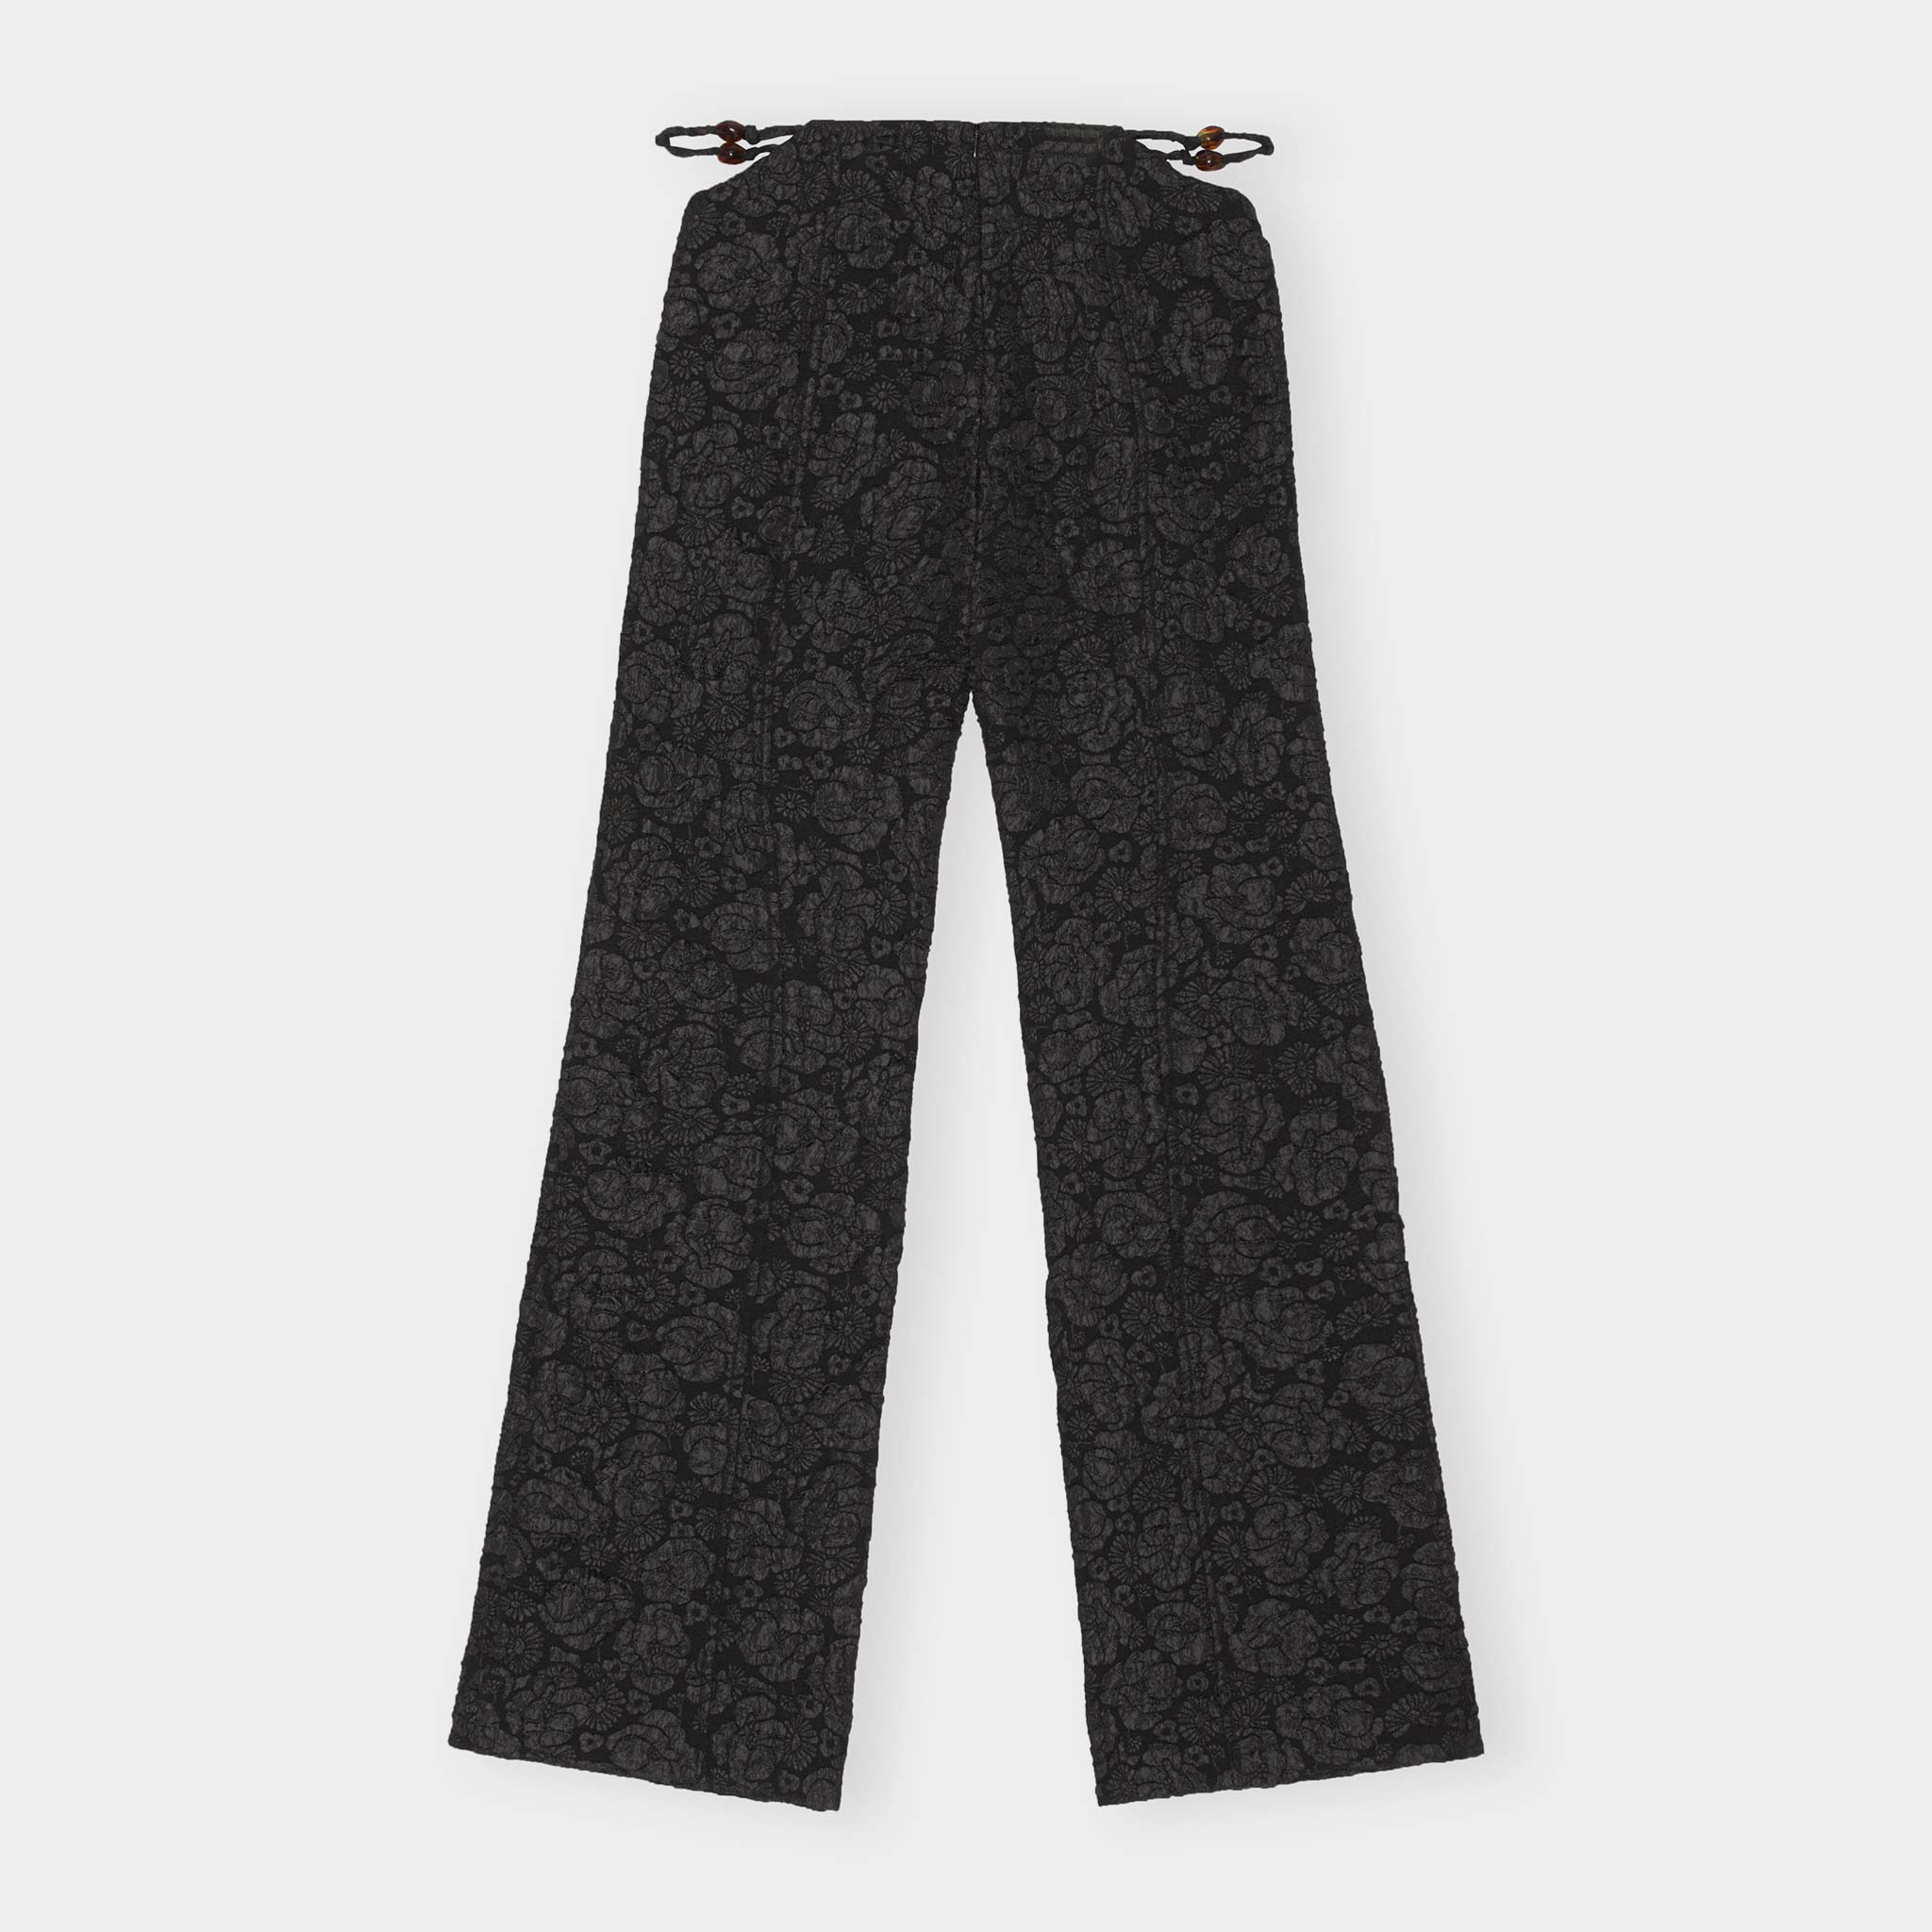 Black floral jacquard trousers with a slightly flared leg and featuring side waist cutout details exposing a thin twisted rope belt - back view.